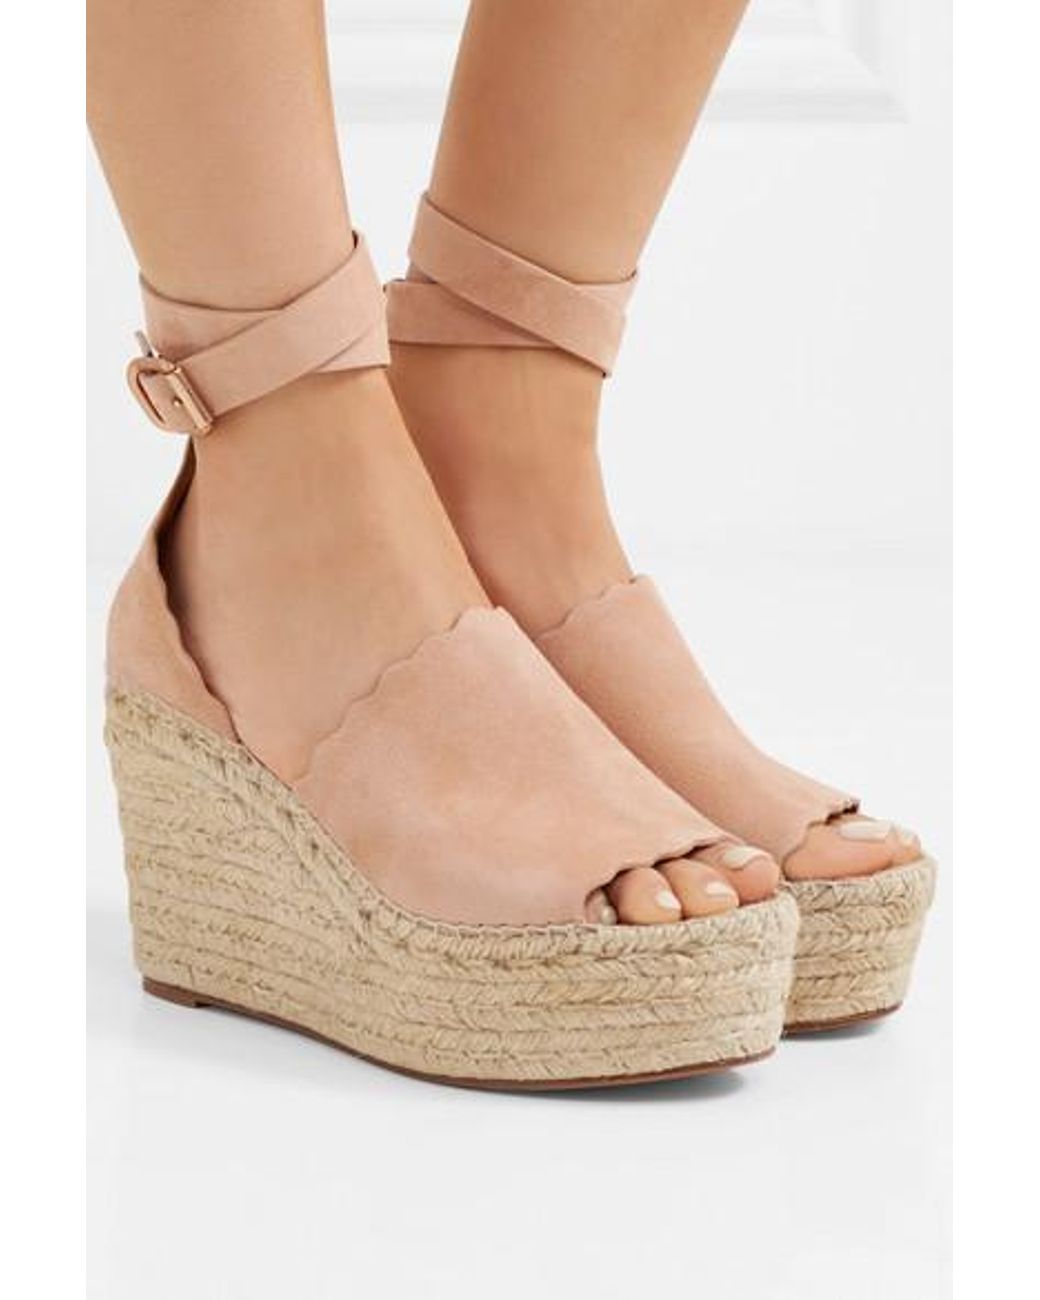 Chloé Lauren Scalloped Suede Espadrille Wedge Sandals in Natural | Lyst